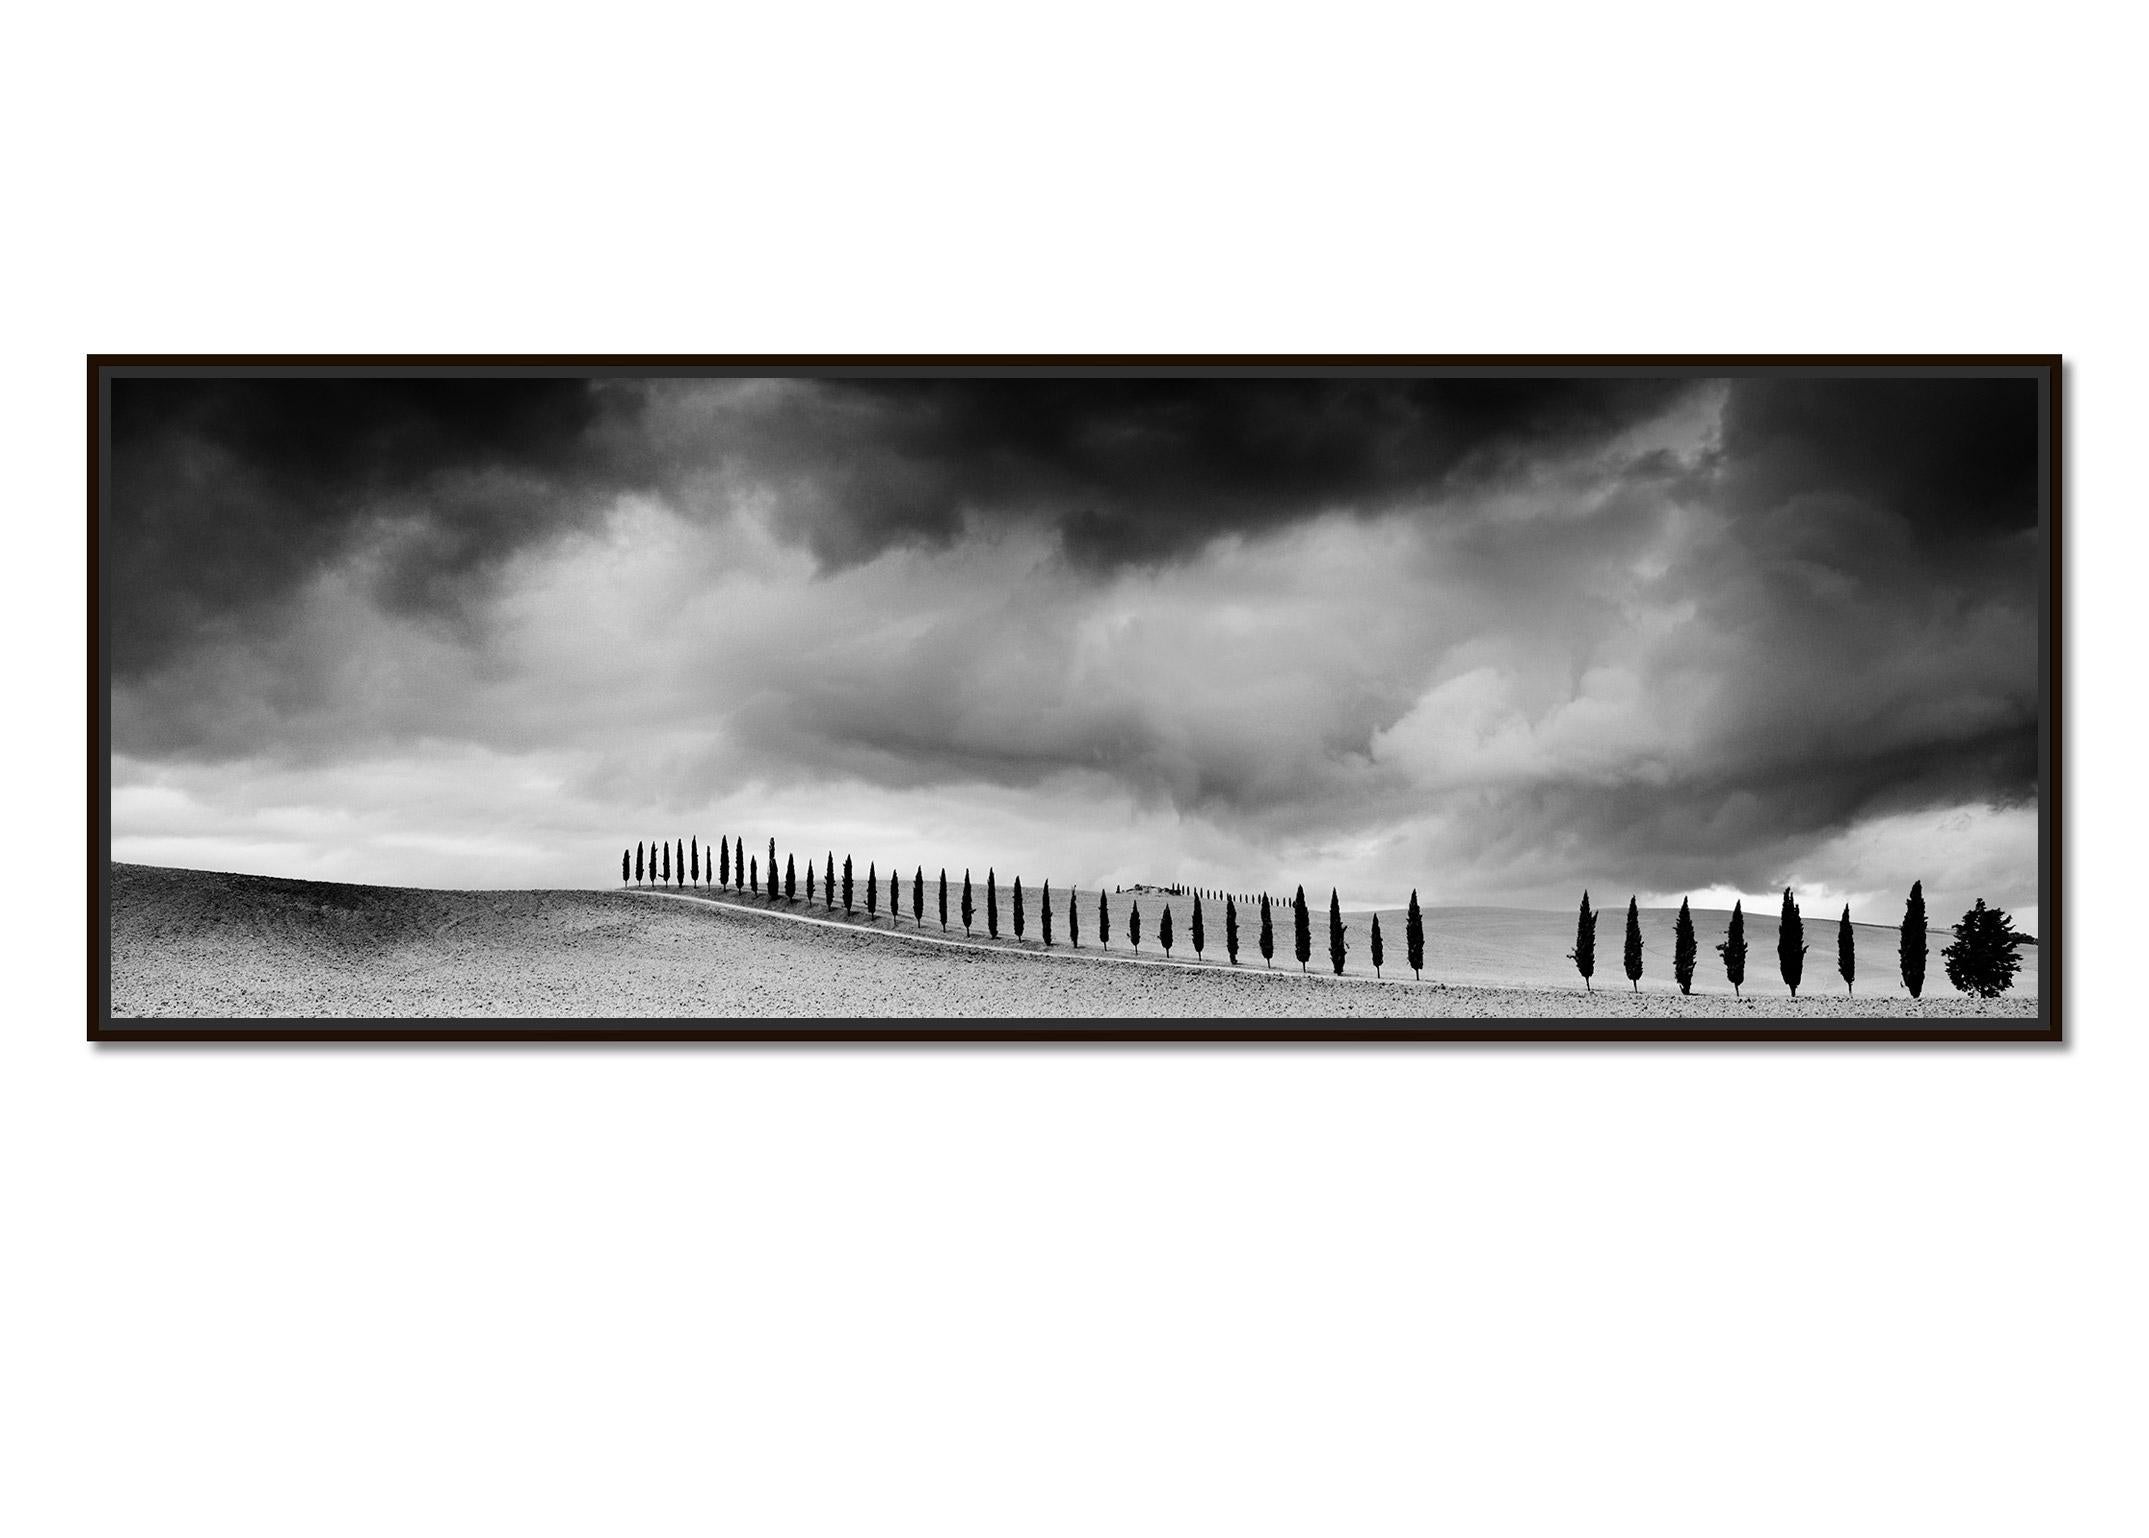 Cypress Tree Avenue, Panorama, Tuscany, black and white photography, landscape - Photograph by Gerald Berghammer